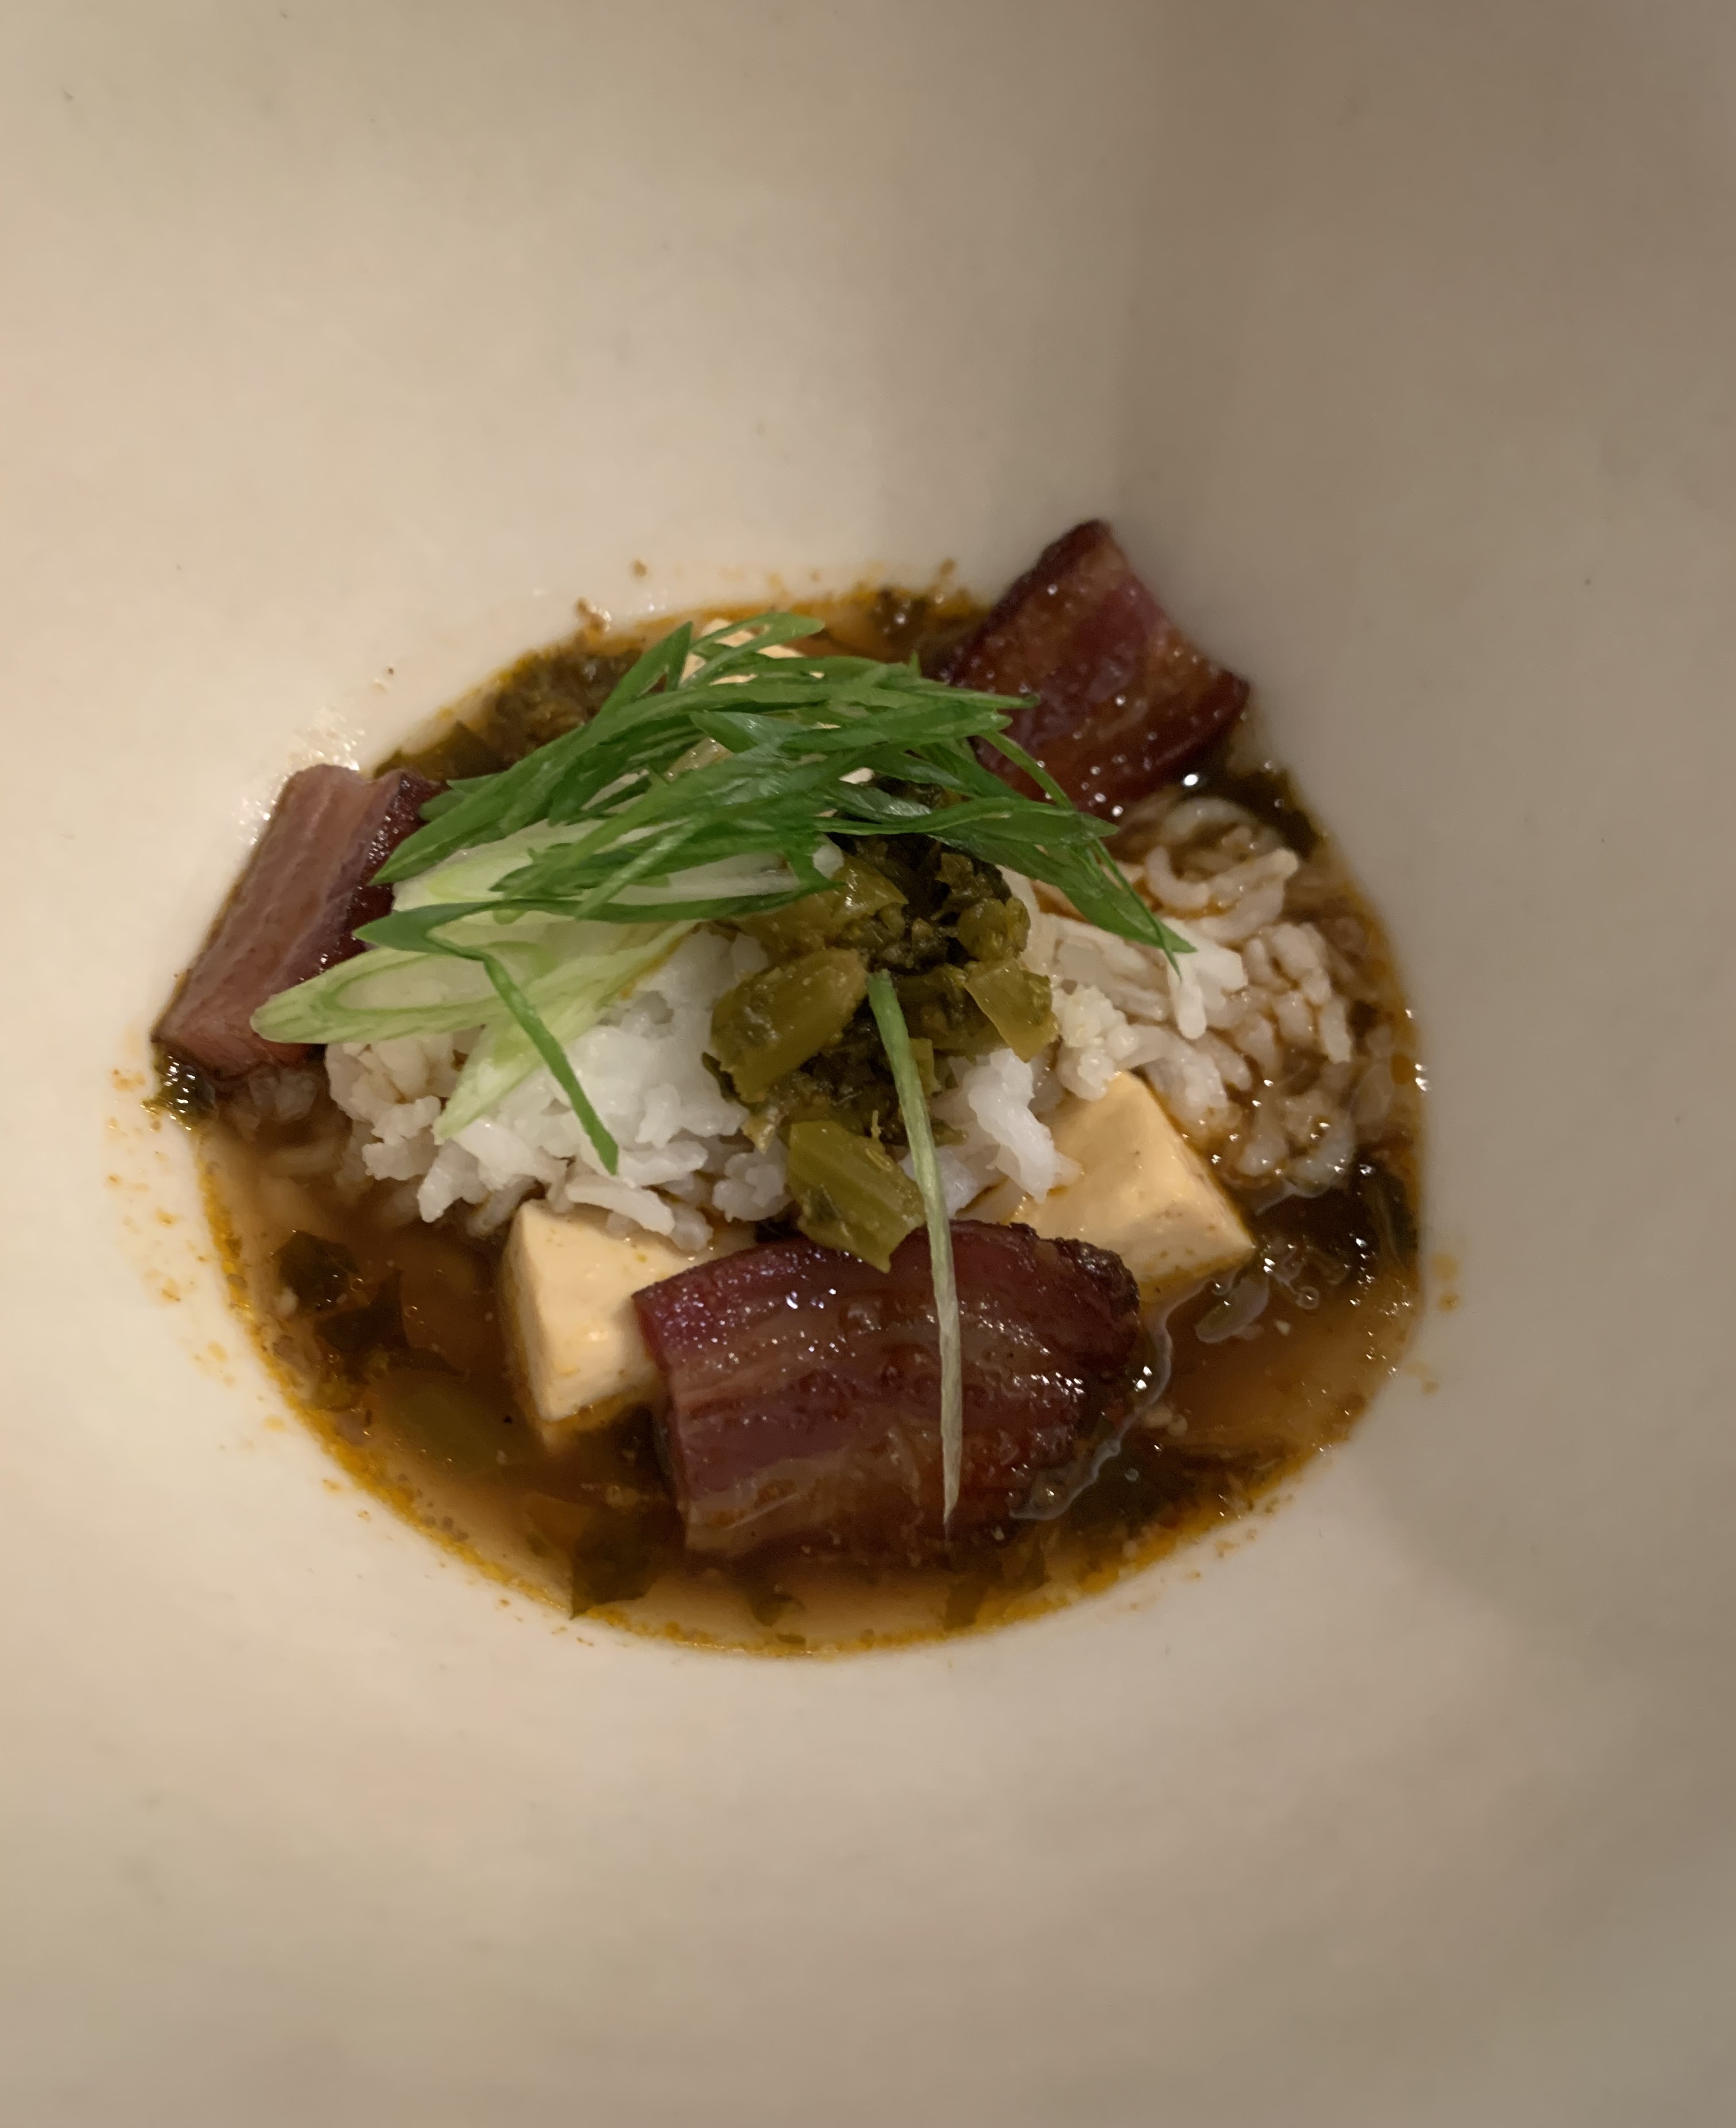 Rice topped with big, thick chunks of bacon. The bacon has charred edges. There's fresh, super-thinly-sliced green onion on top of the rice, along with a green pickled vegetable. Some pale yellow cubes of tofu are visible beneath the rice. There is a shallow pool of dark-gold broth underneath everything.